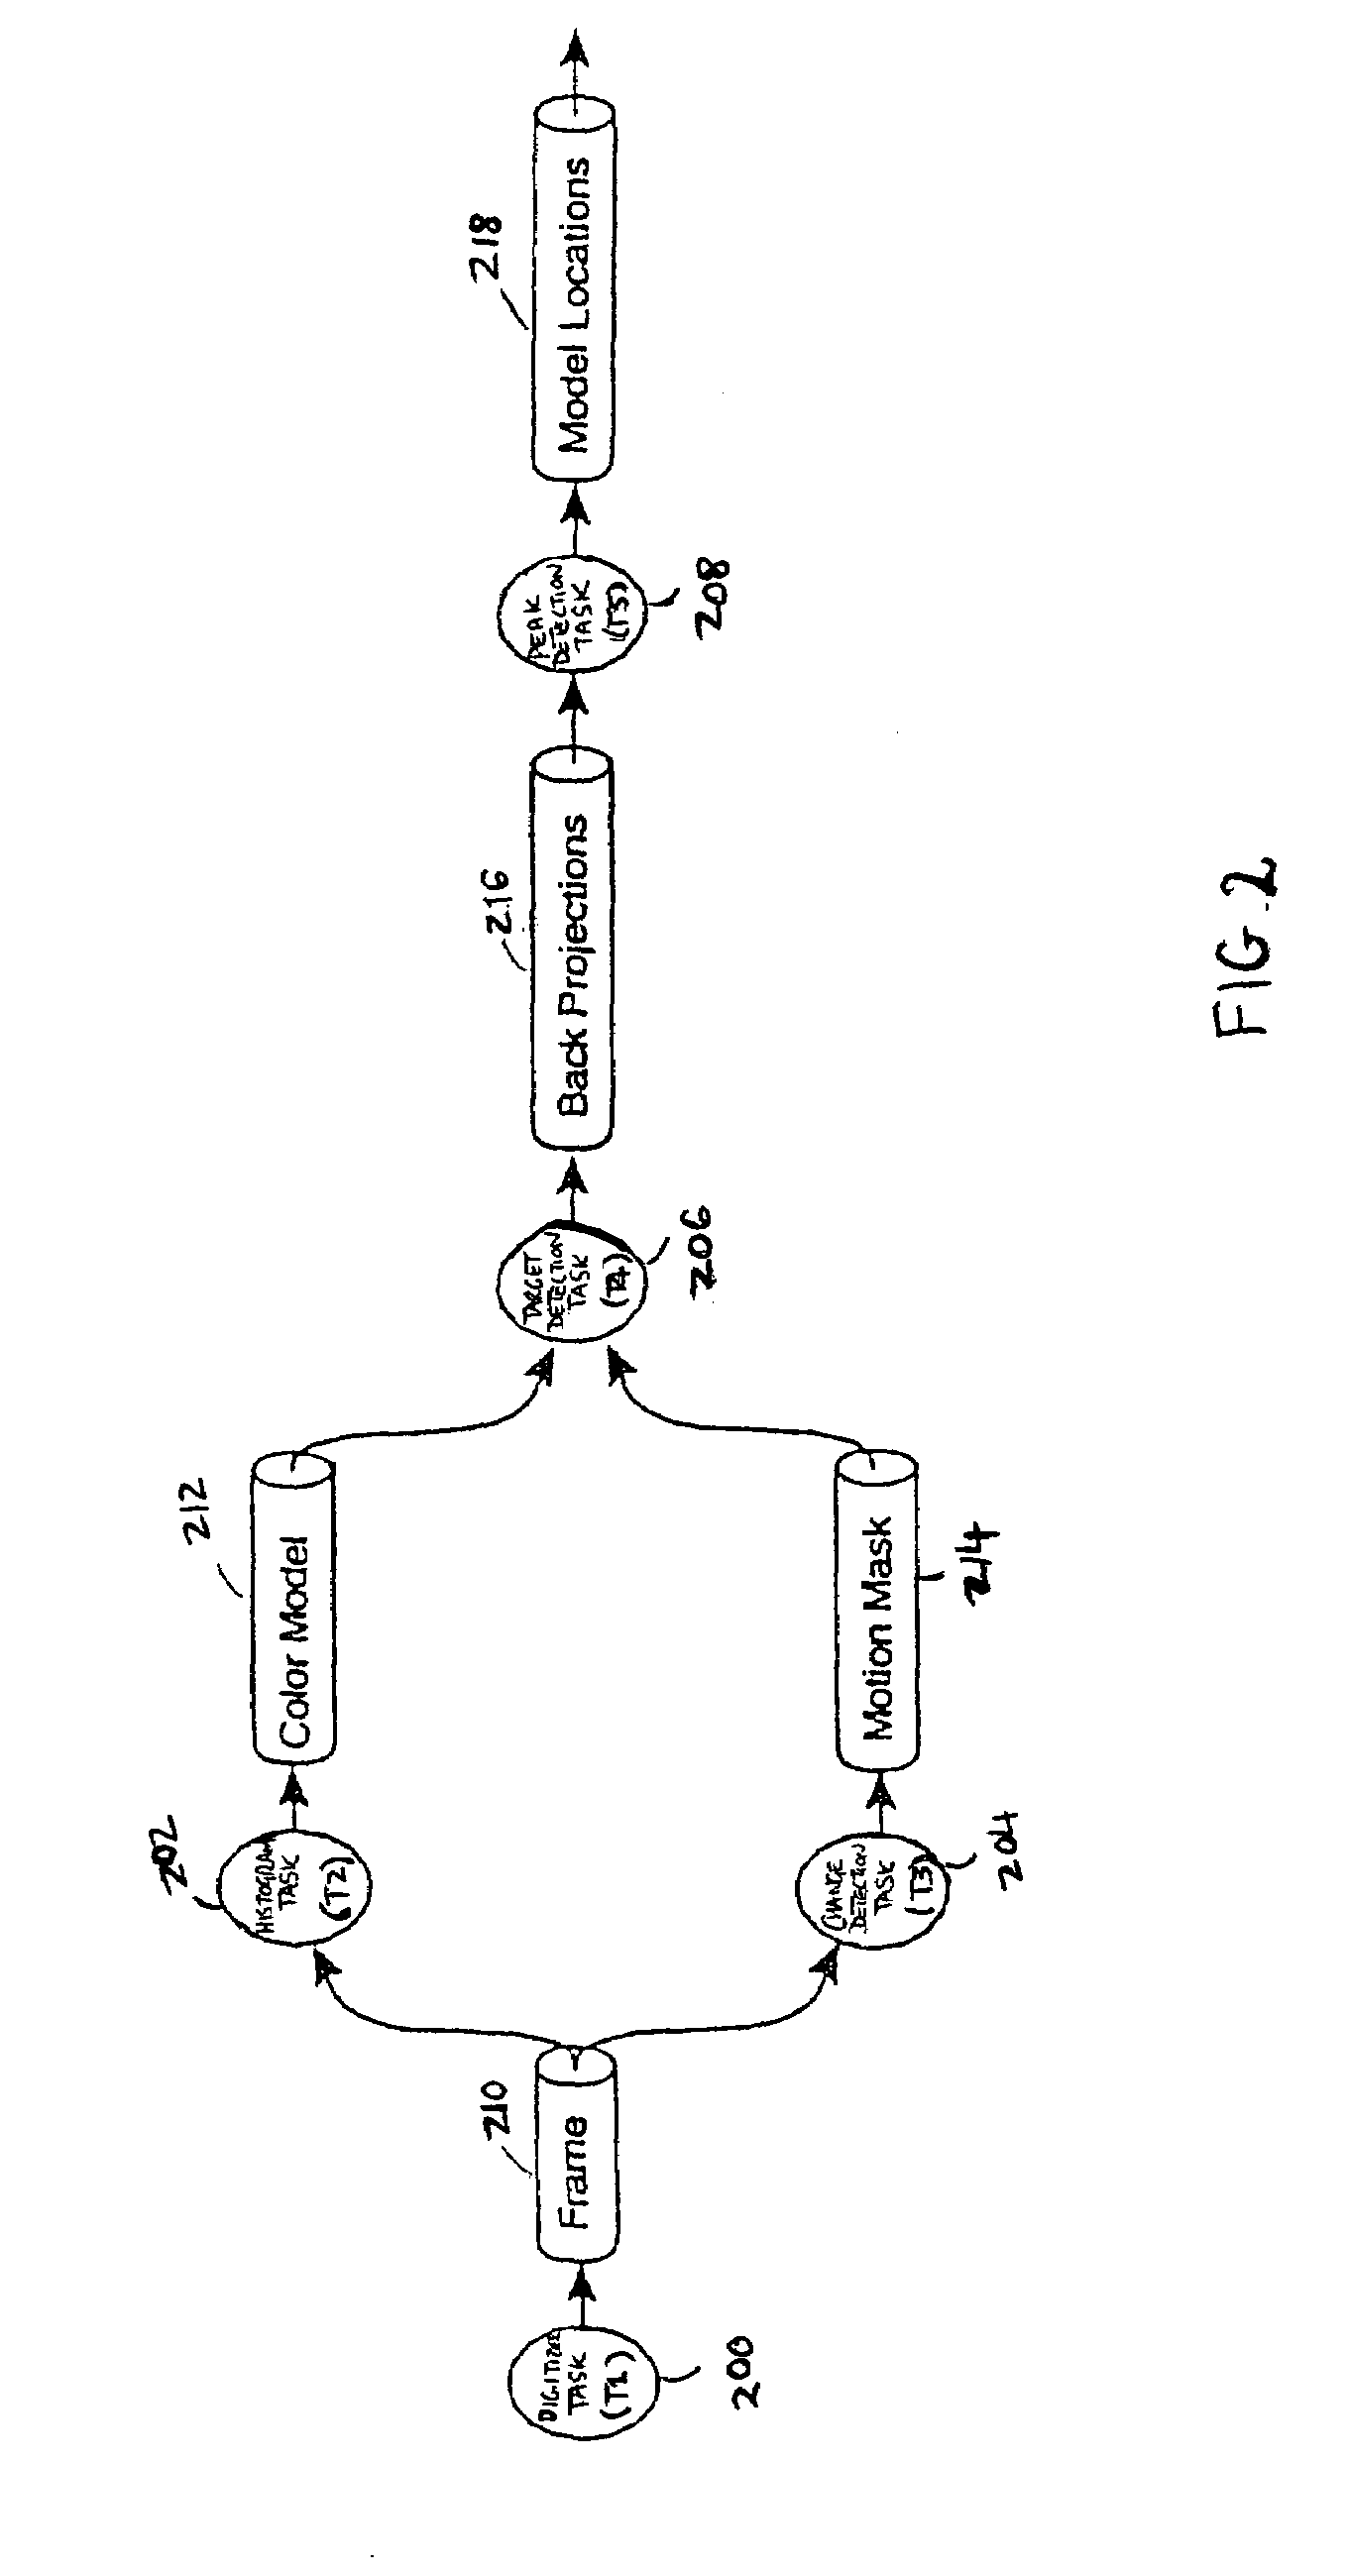 System for computing the optimal static schedule using the stored task execution costs with recent schedule execution costs